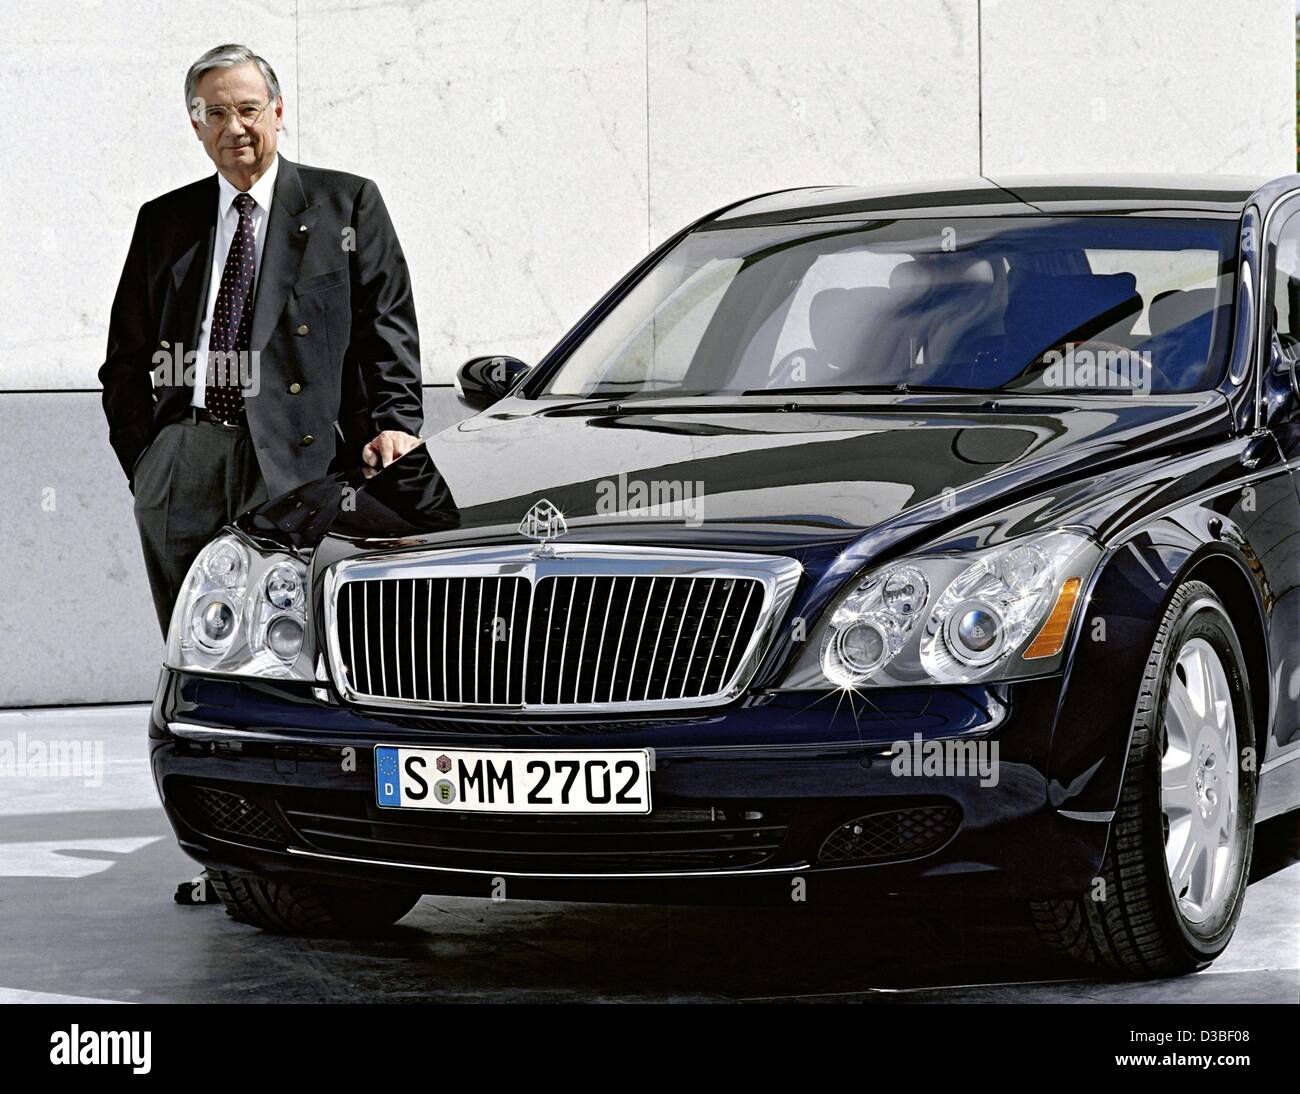 (dpa) - An undated handout shows Hermann Gaus, longtime director of the car development branch of the Daimler-Benz corporation and since 2001 project manager of the Maybach, posing next to a Maybach limousine. The 67-year-old 'Mr Maybach' will retire on March 2003. Stock Photo